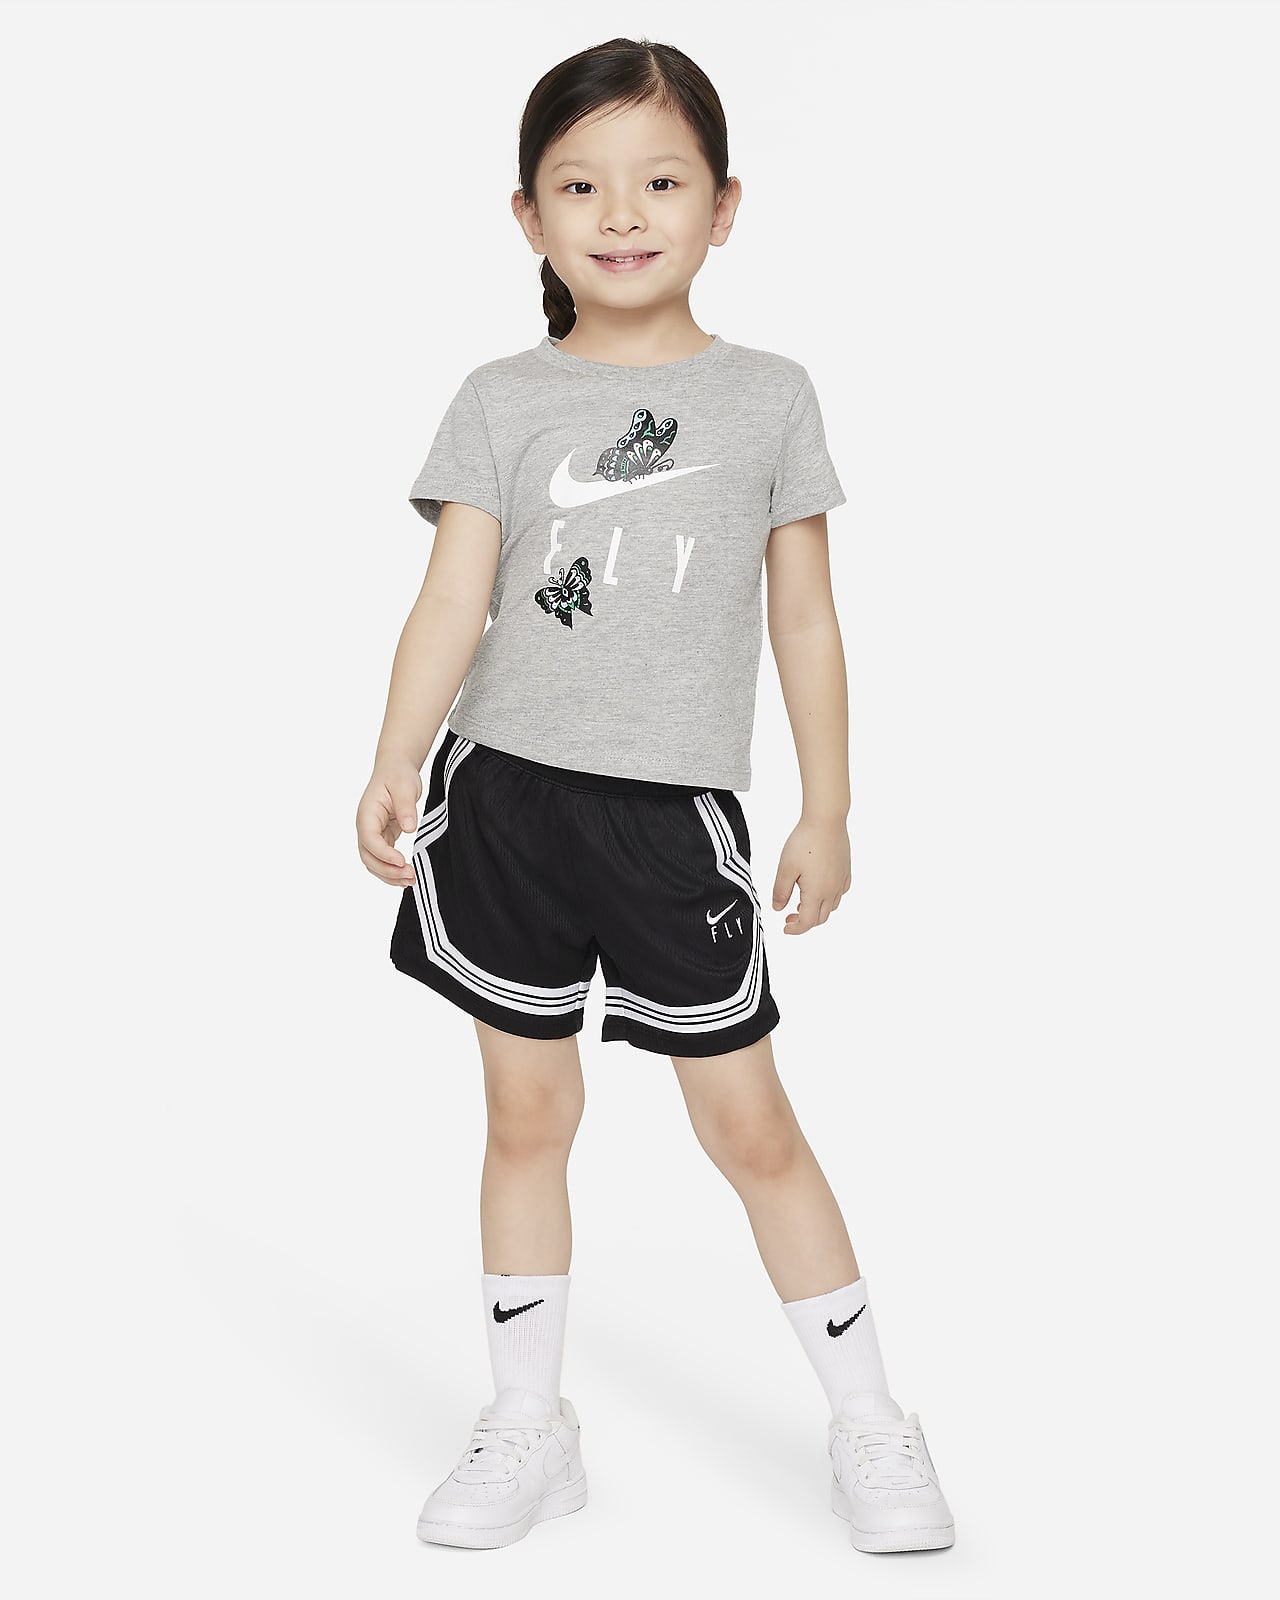 Nike Dry-FIT Fly Crossover Toddler 2-Piece T-Shirt Set